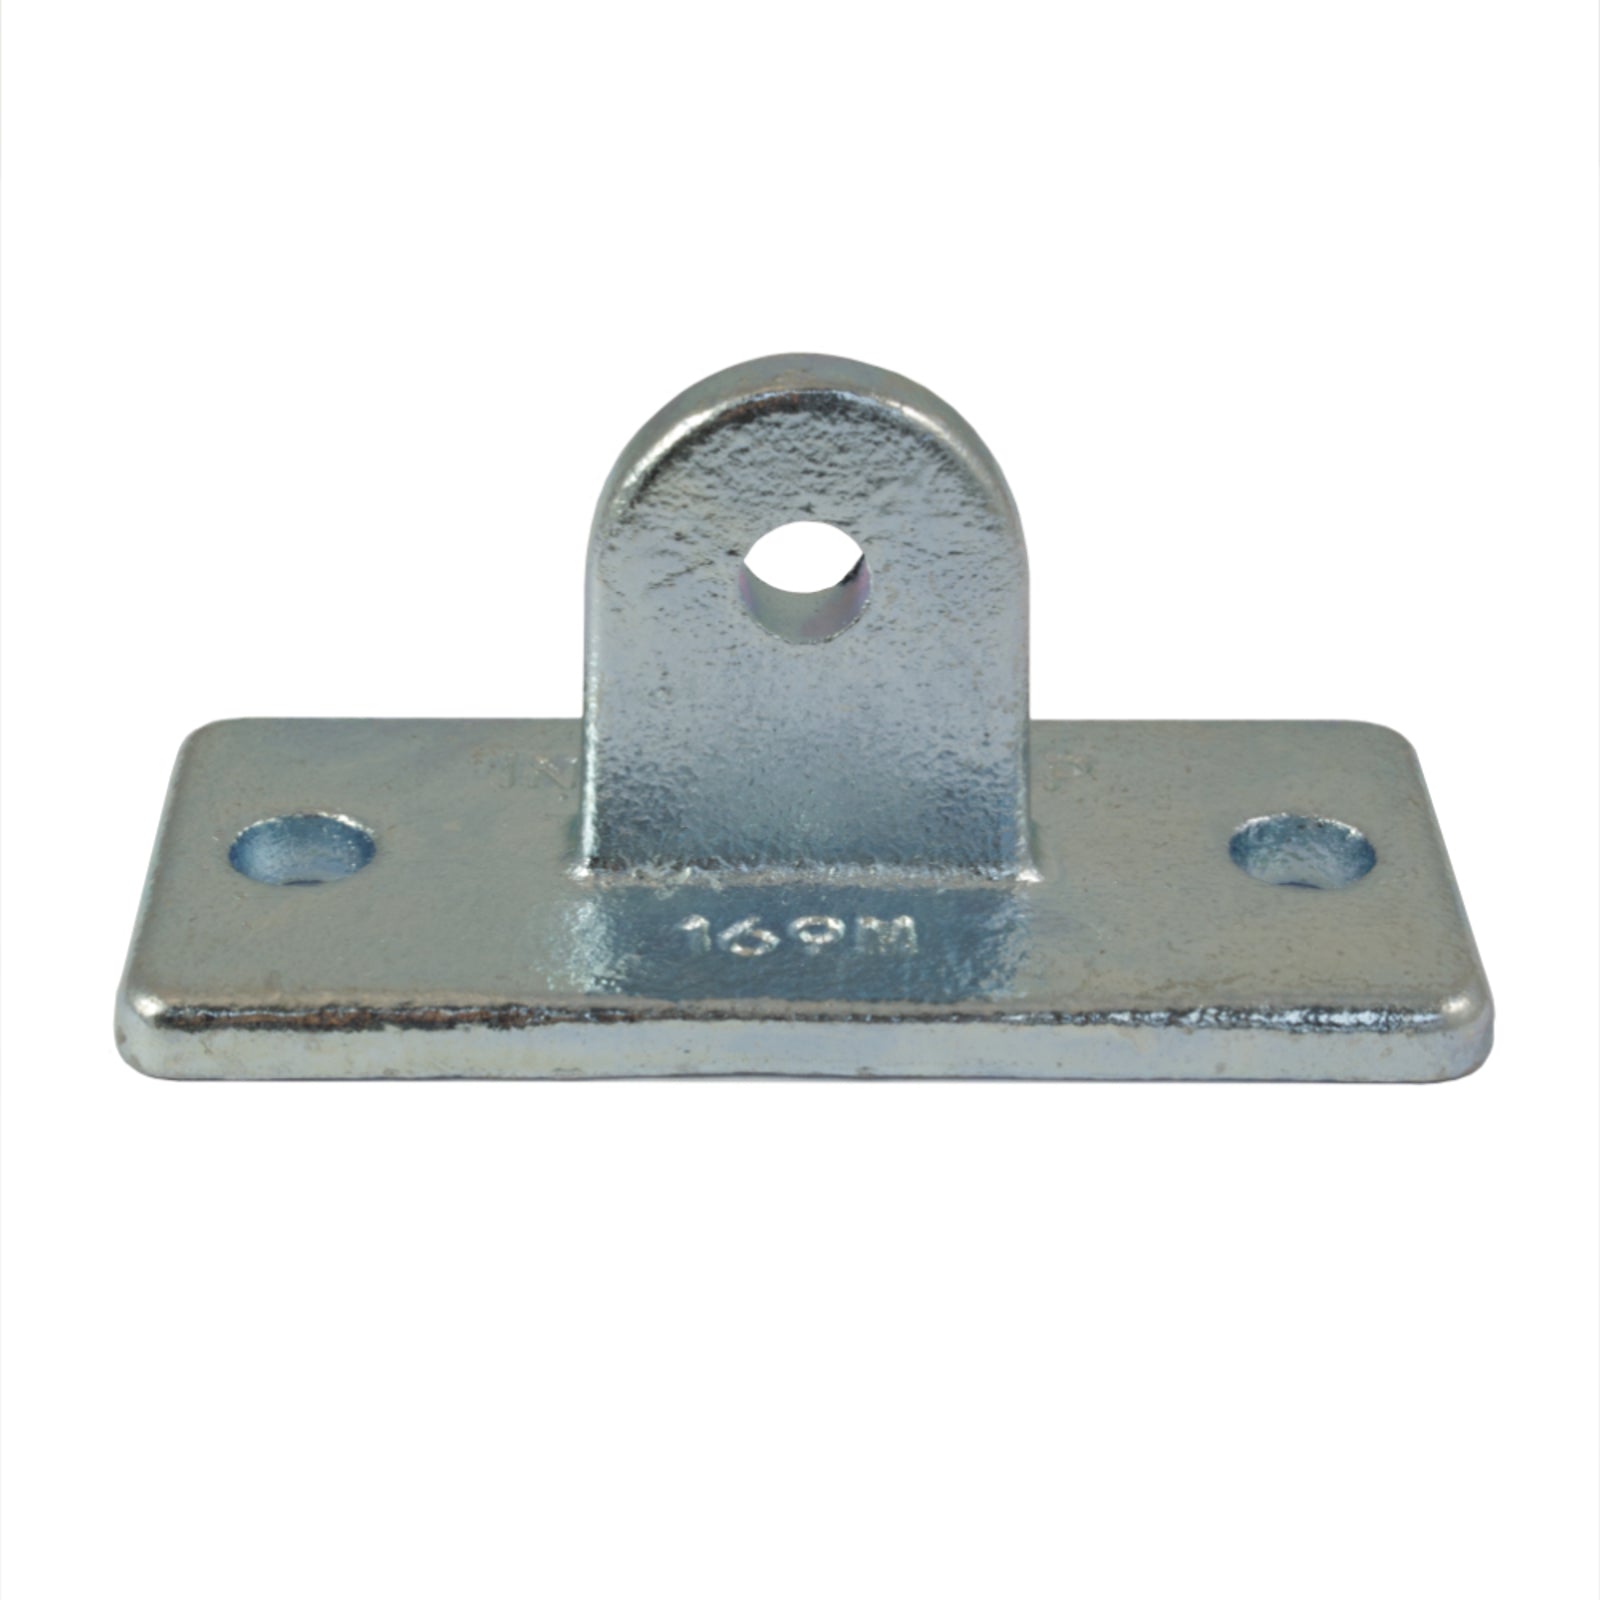 Swivel Base Flange Male Part (Swivel Wall Flange) for Galvanised Pipe (Interclamp Code 169M). Shop rail, pipe and fence fittings online chain.com.au. Australia wide shipping.